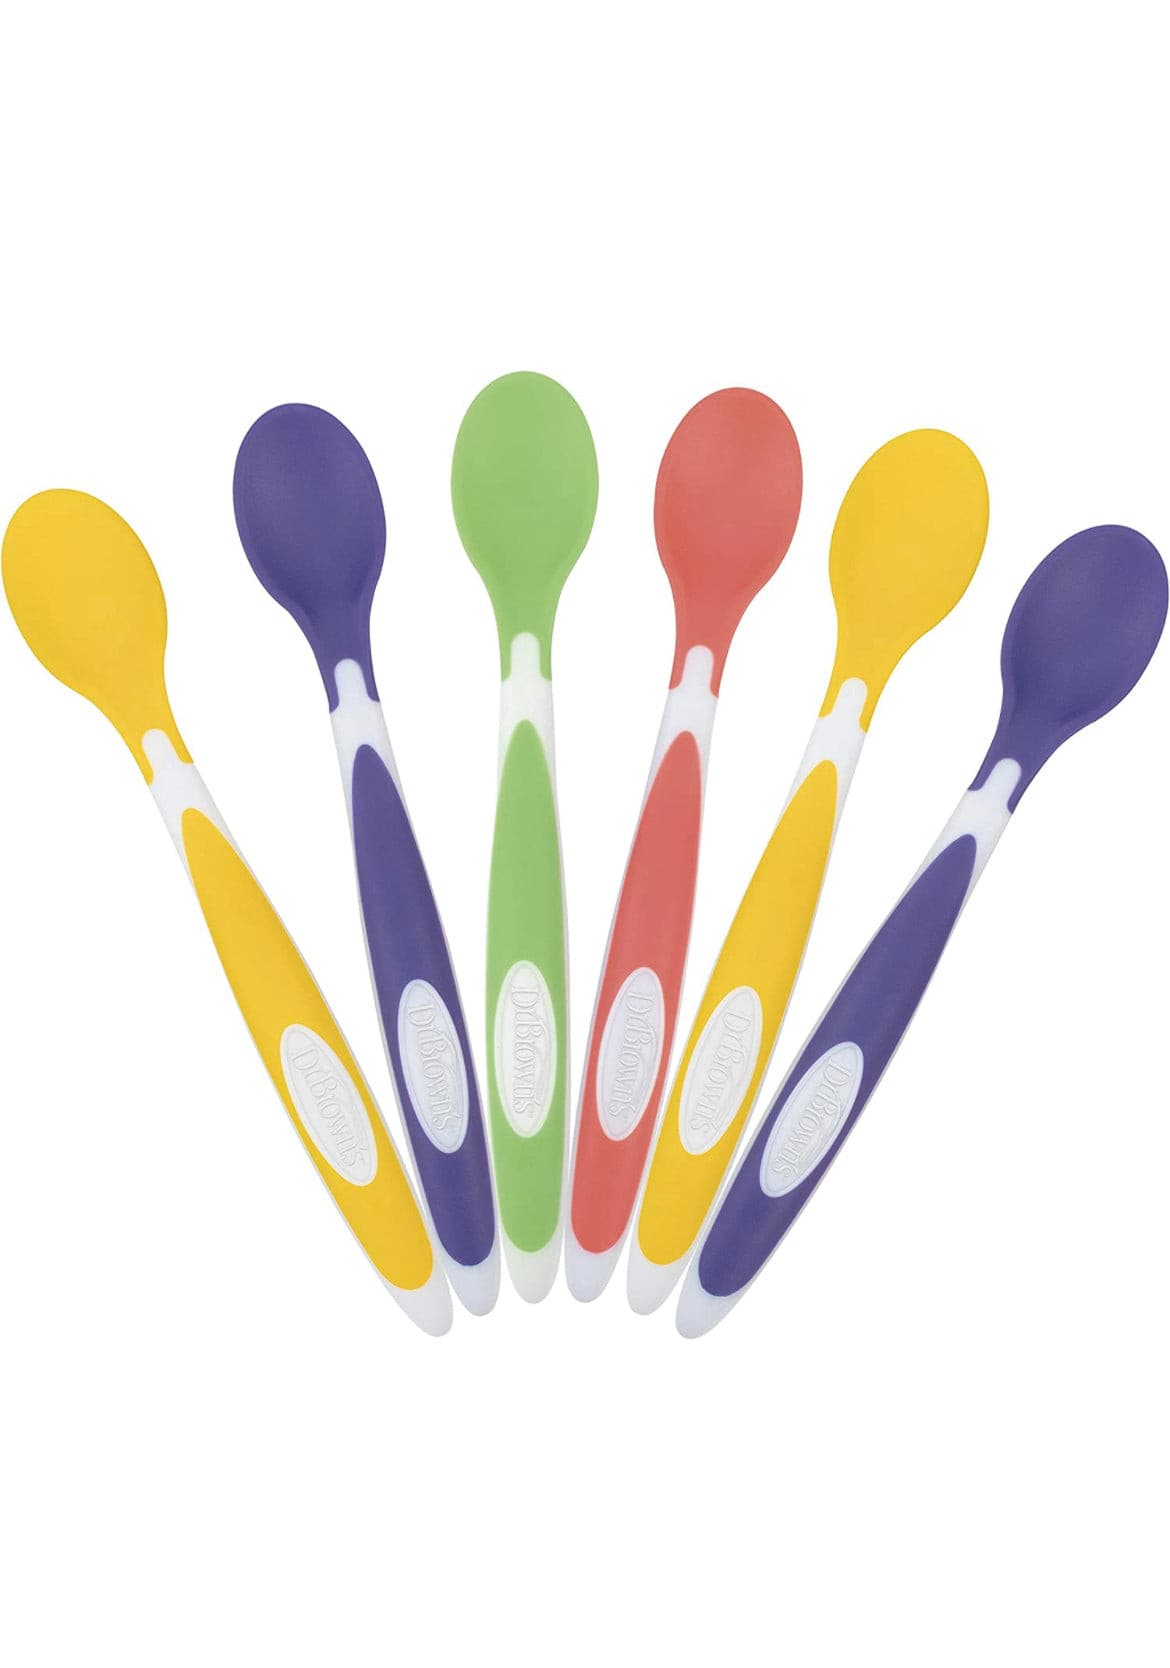 Soft-Tip Baby Feeding Spoons by Dr. Brown, 6 Pack.